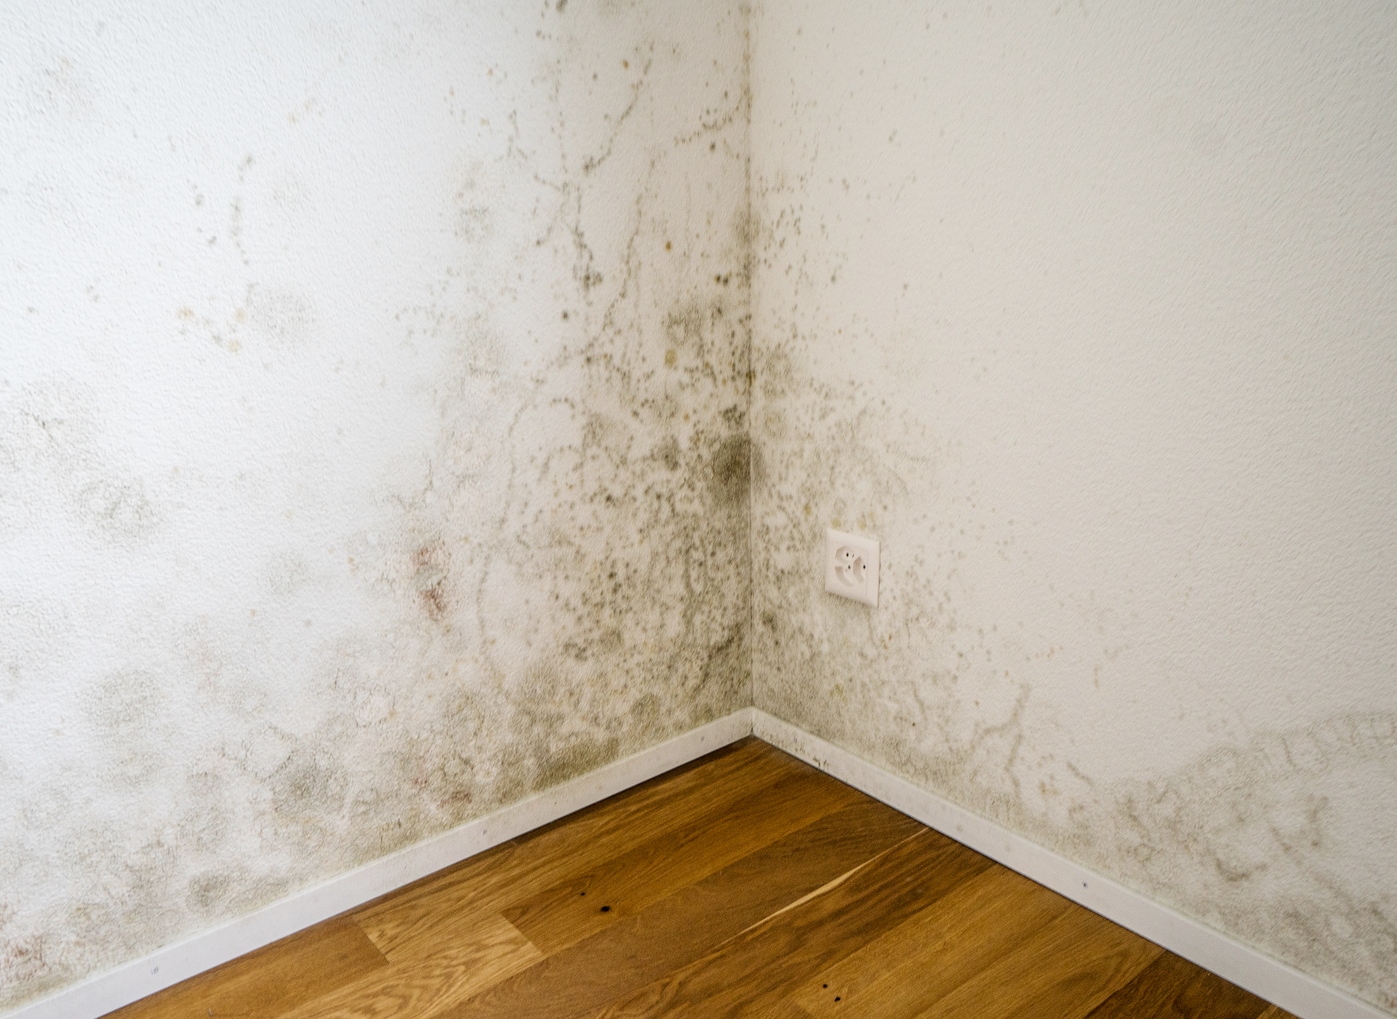 bigstock-Tocix-Mold-And-Mildew-On-The-W-250574389